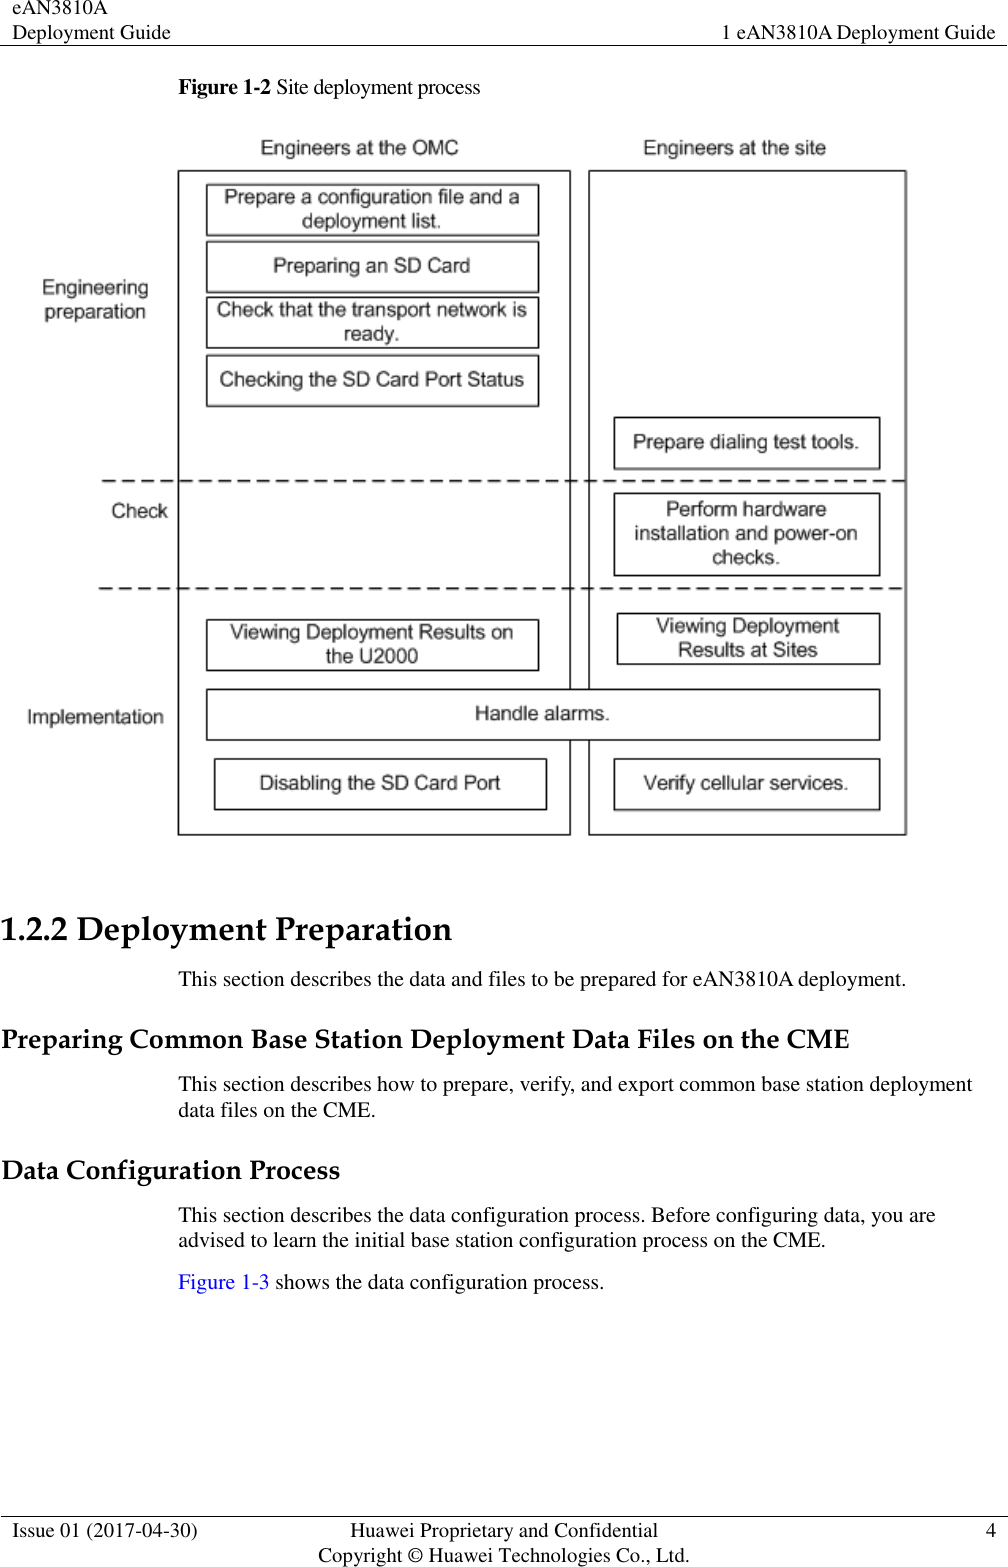 eAN3810A Deployment Guide 1 eAN3810A Deployment Guide  Issue 01 (2017-04-30) Huawei Proprietary and Confidential                                     Copyright © Huawei Technologies Co., Ltd. 4  Figure 1-2 Site deployment process   1.2.2 Deployment Preparation   This section describes the data and files to be prepared for eAN3810A deployment.     Preparing Common Base Station Deployment Data Files on the CME This section describes how to prepare, verify, and export common base station deployment data files on the CME.     Data Configuration Process This section describes the data configuration process. Before configuring data, you are advised to learn the initial base station configuration process on the CME. Figure 1-3 shows the data configuration process. 